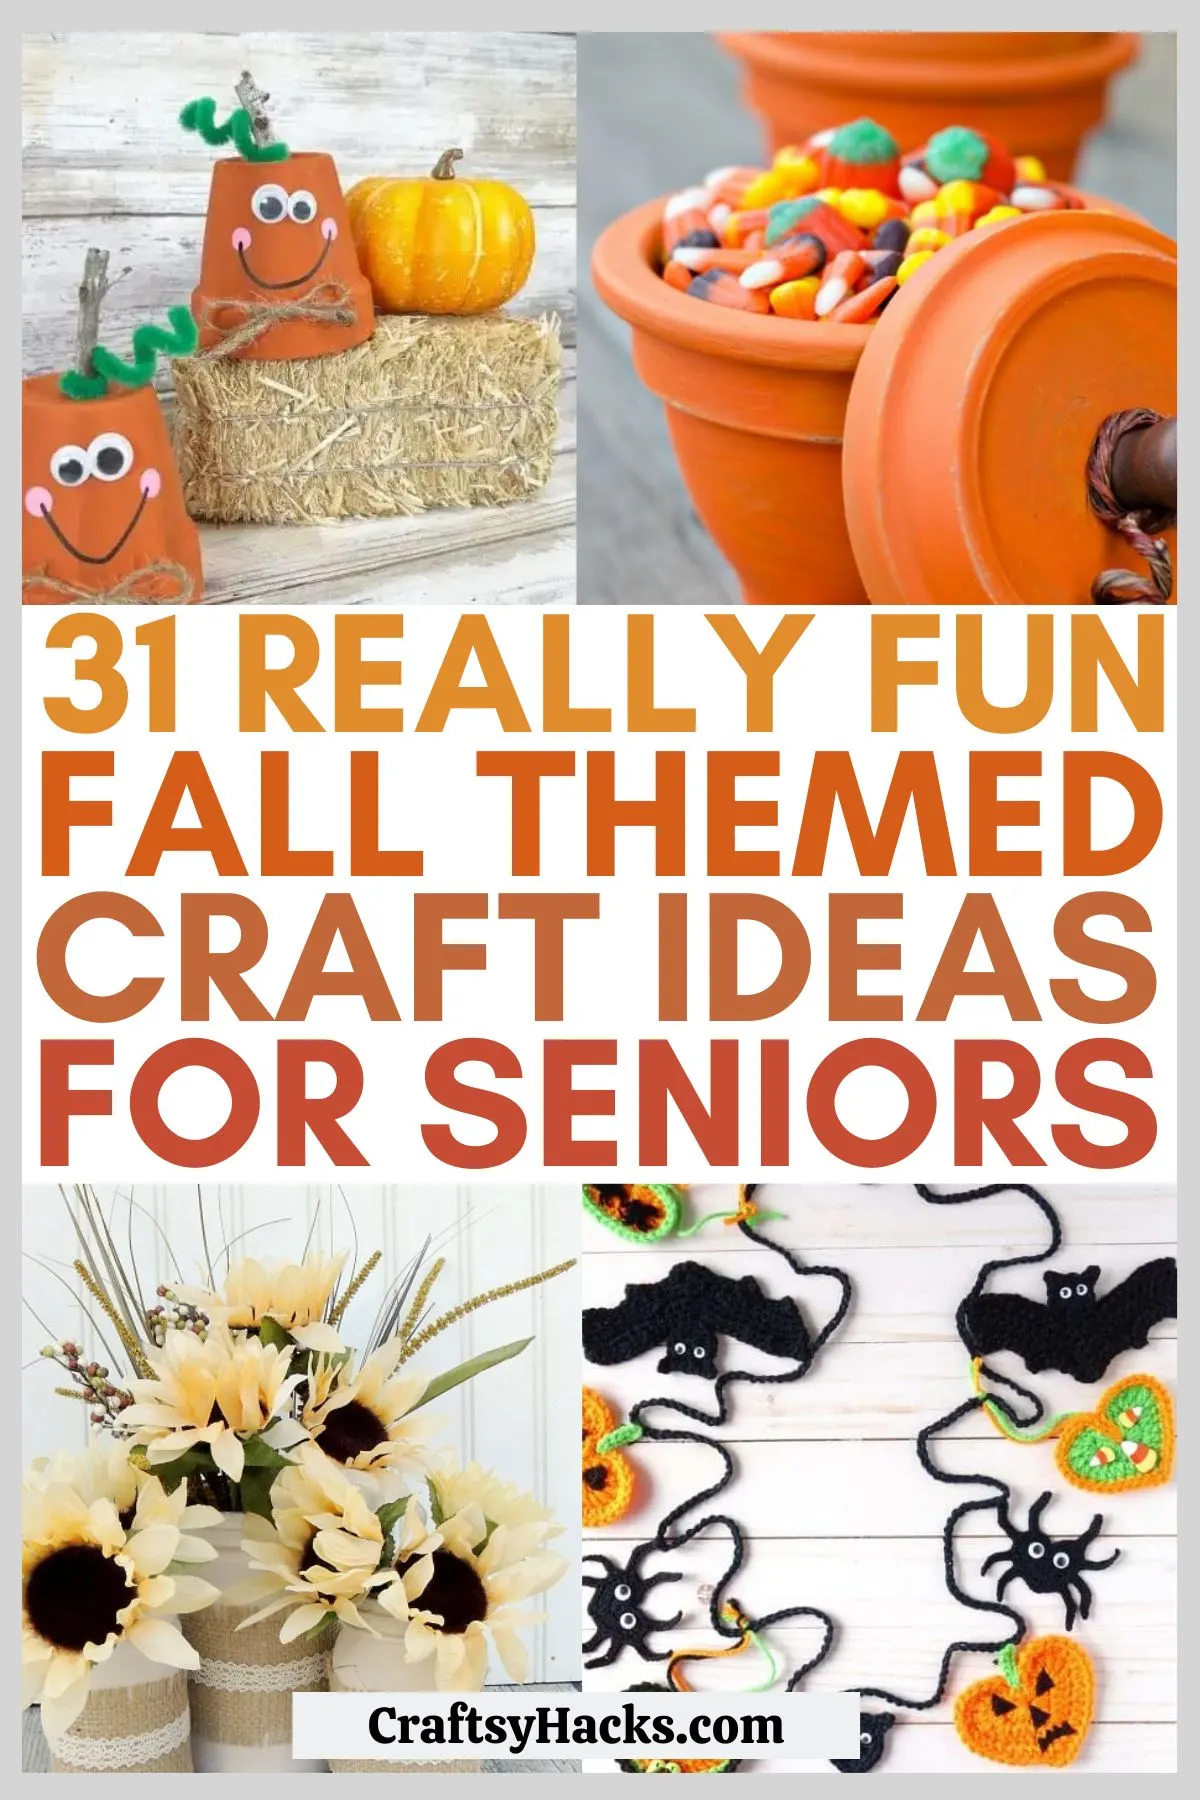 27 Easy Fall Crafts for Adults - Craftsy Hacks